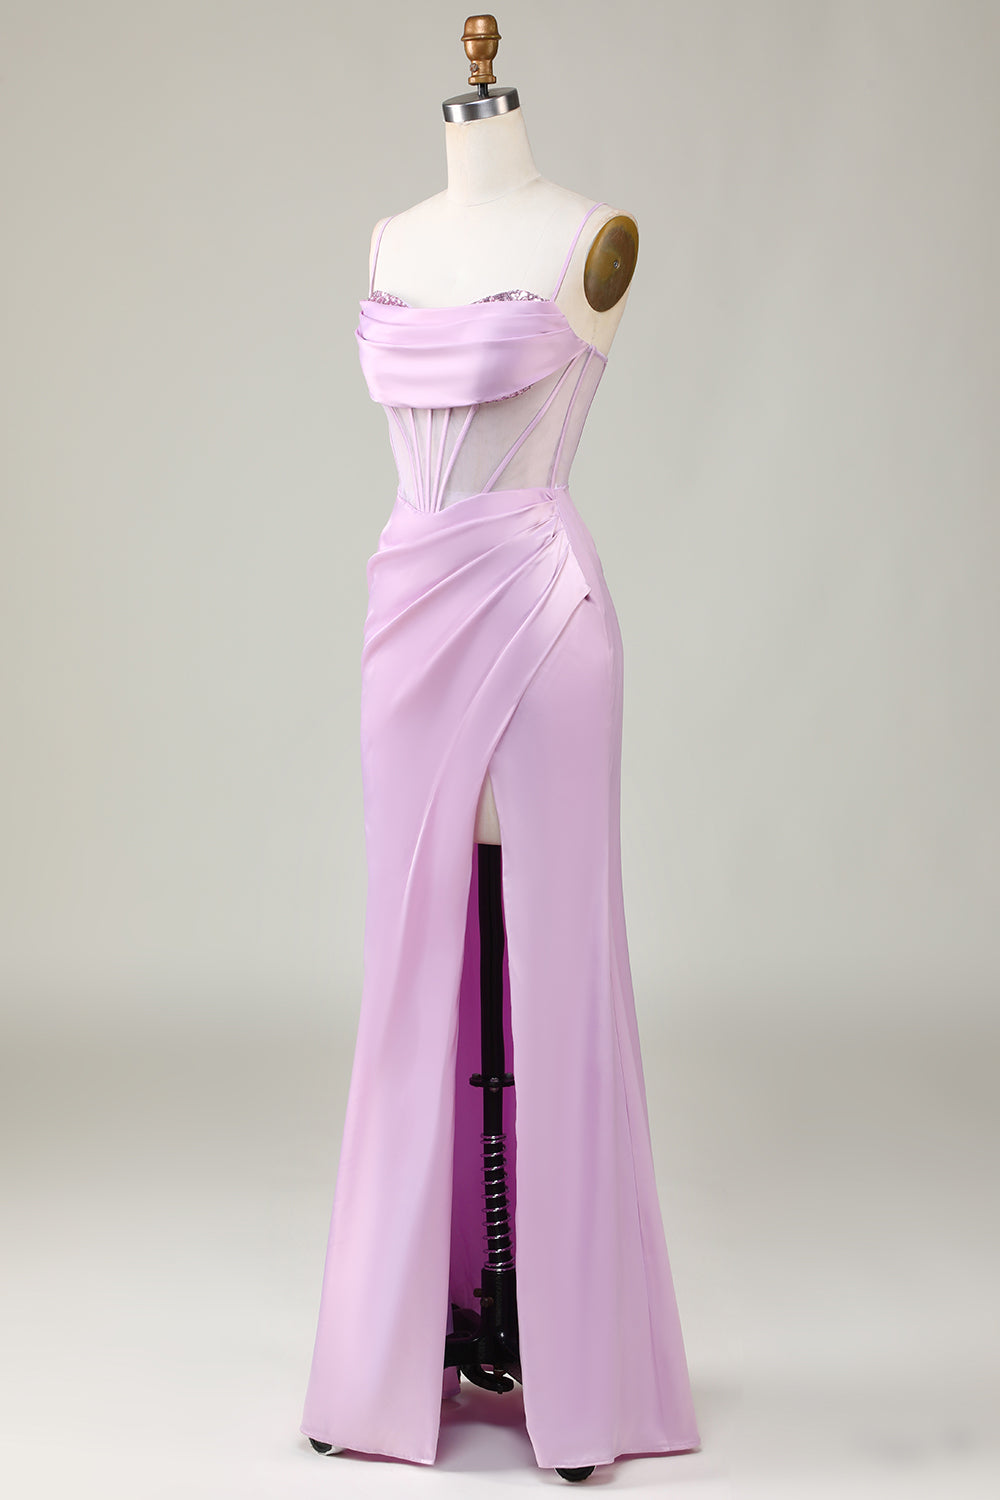 Lilac Mermaid Spaghetti Straps Long Wedding Guest Dress with Slit